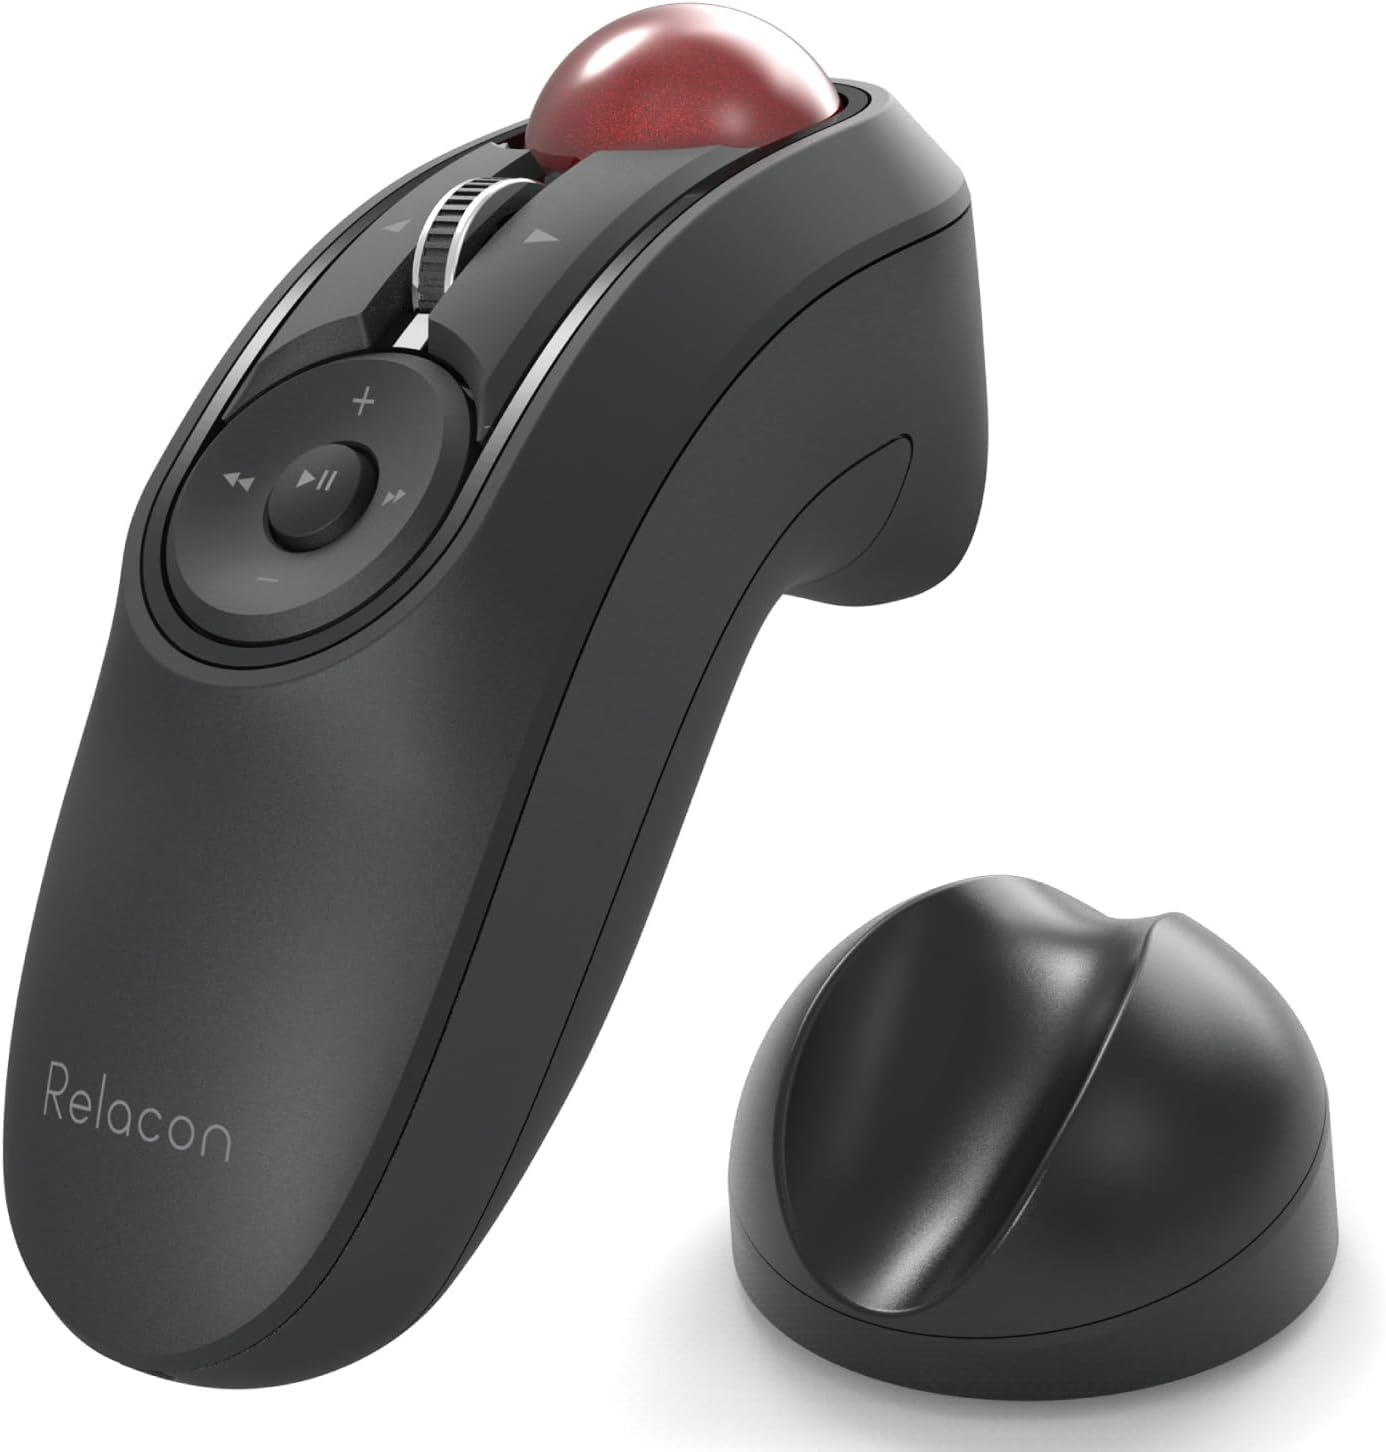 Handheld Trackball Mouse, Thumb Control, Left Right Handed Mice, Bluetooth, 10-B